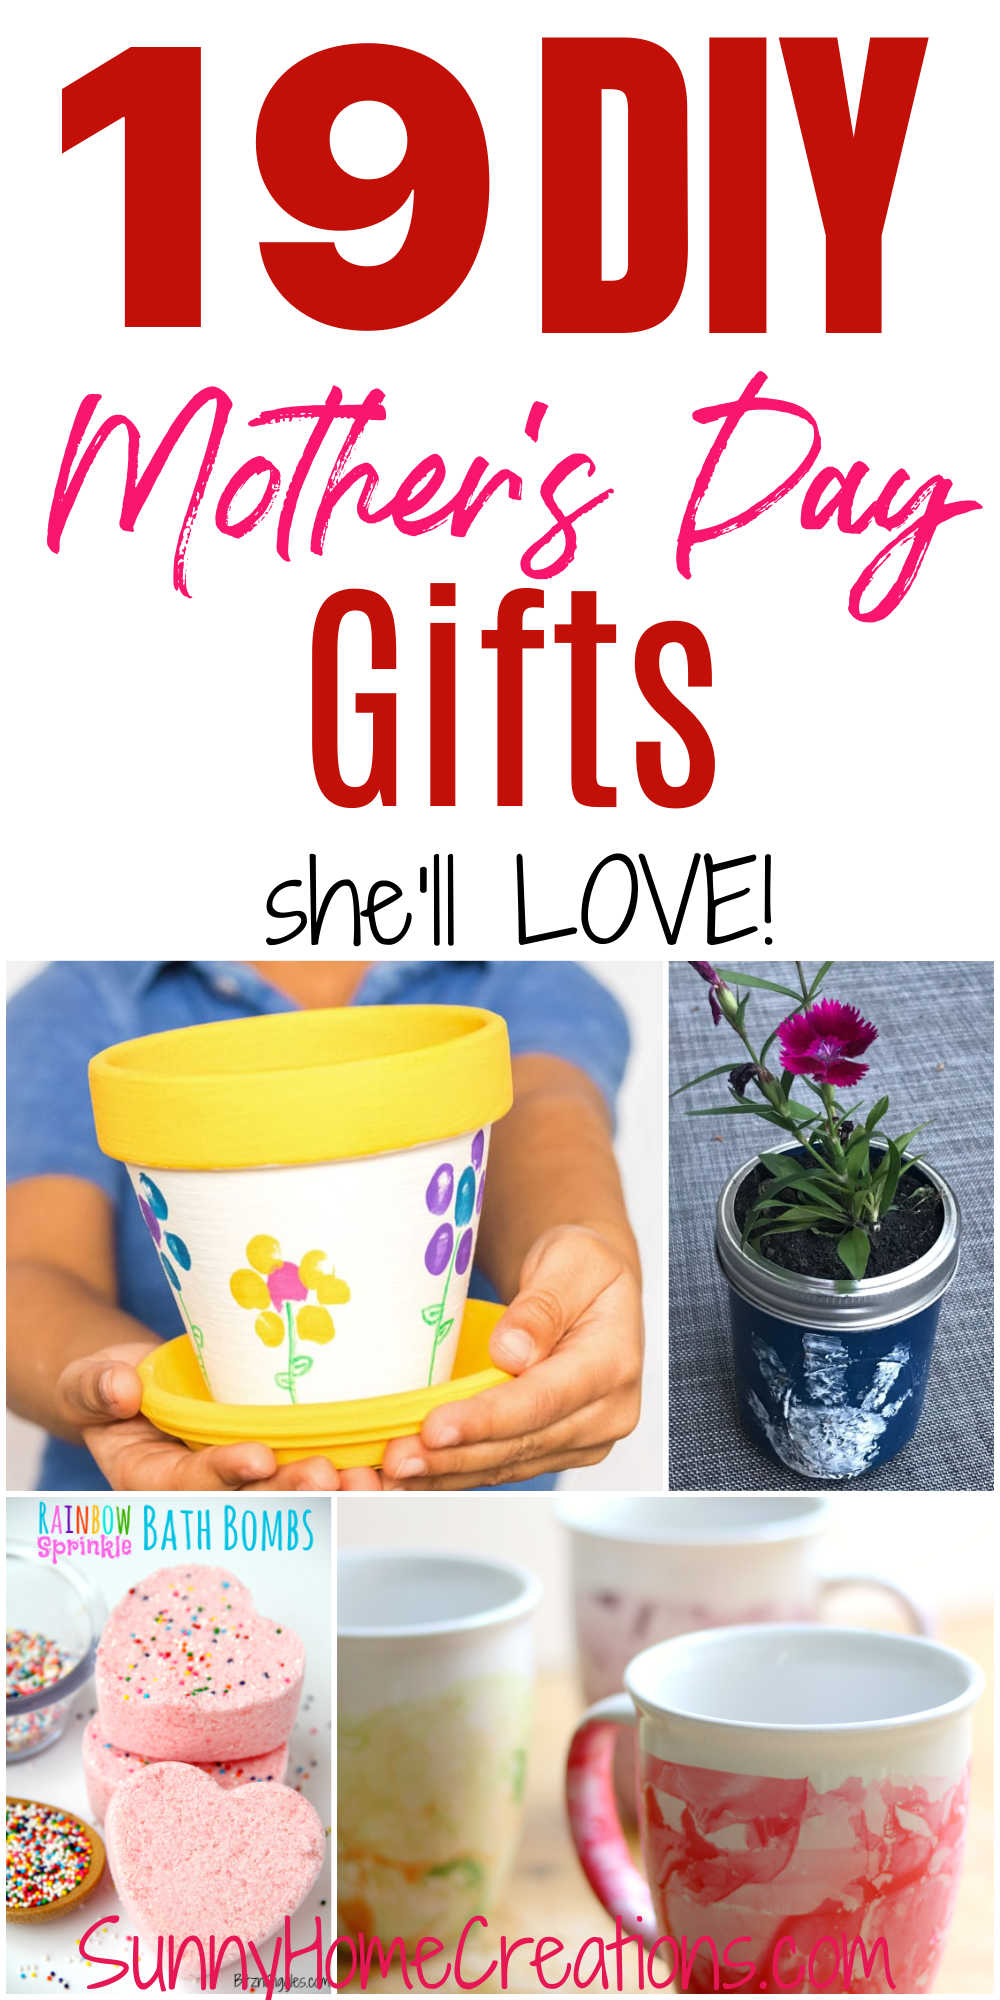 Pin image; top says "19 DIY Mother's Day Gifts she'll love" with collage of gifts under.